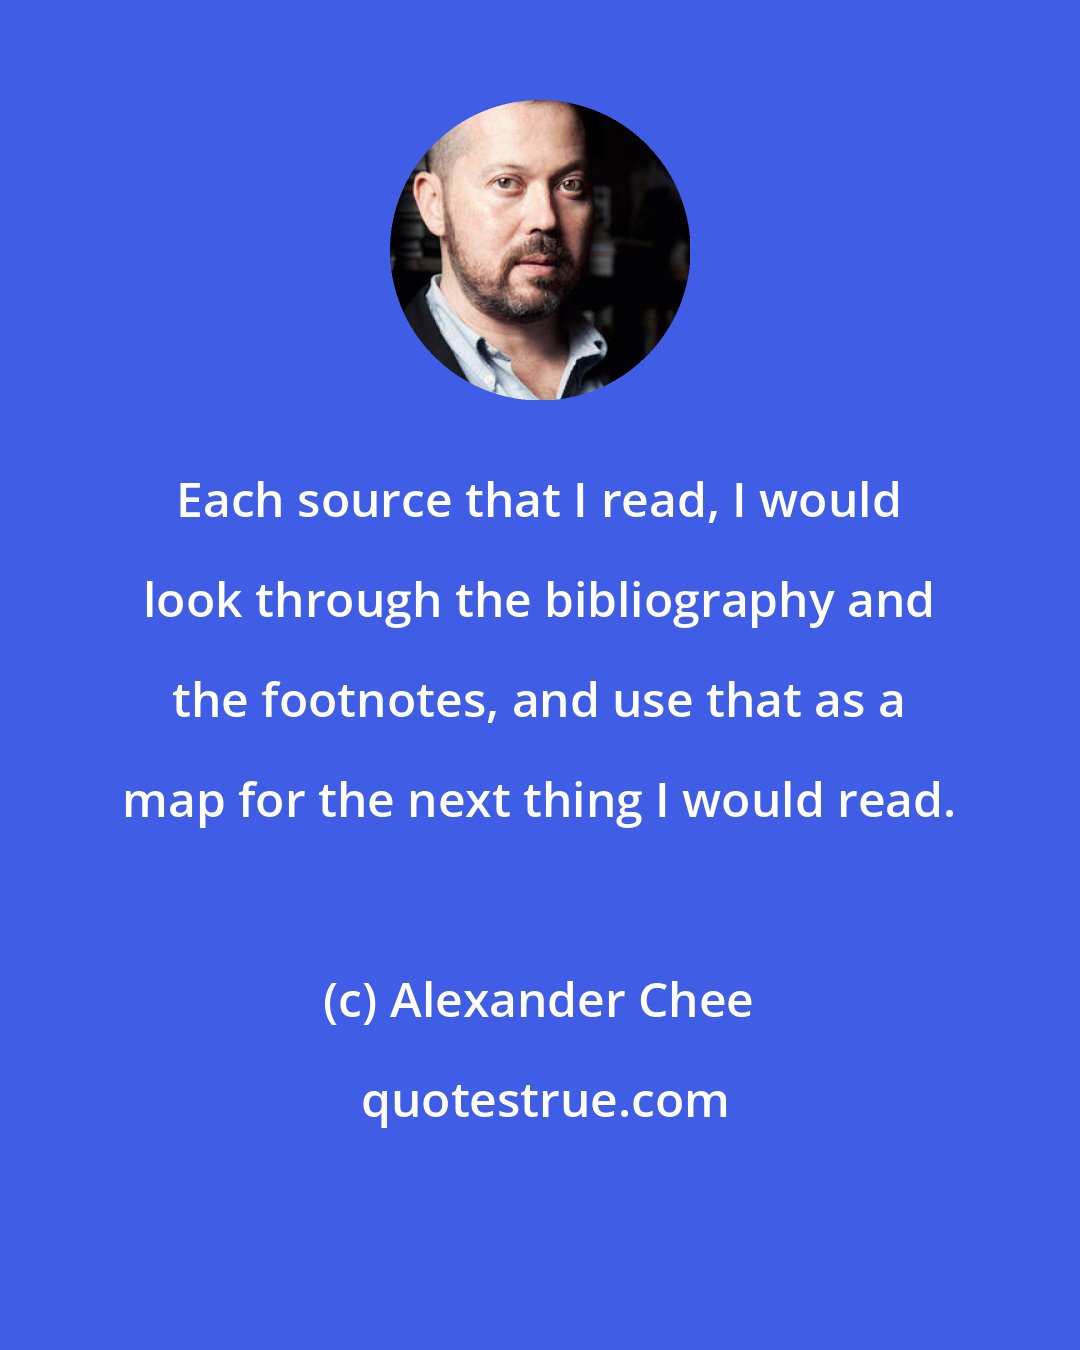 Alexander Chee: Each source that I read, I would look through the bibliography and the footnotes, and use that as a map for the next thing I would read.